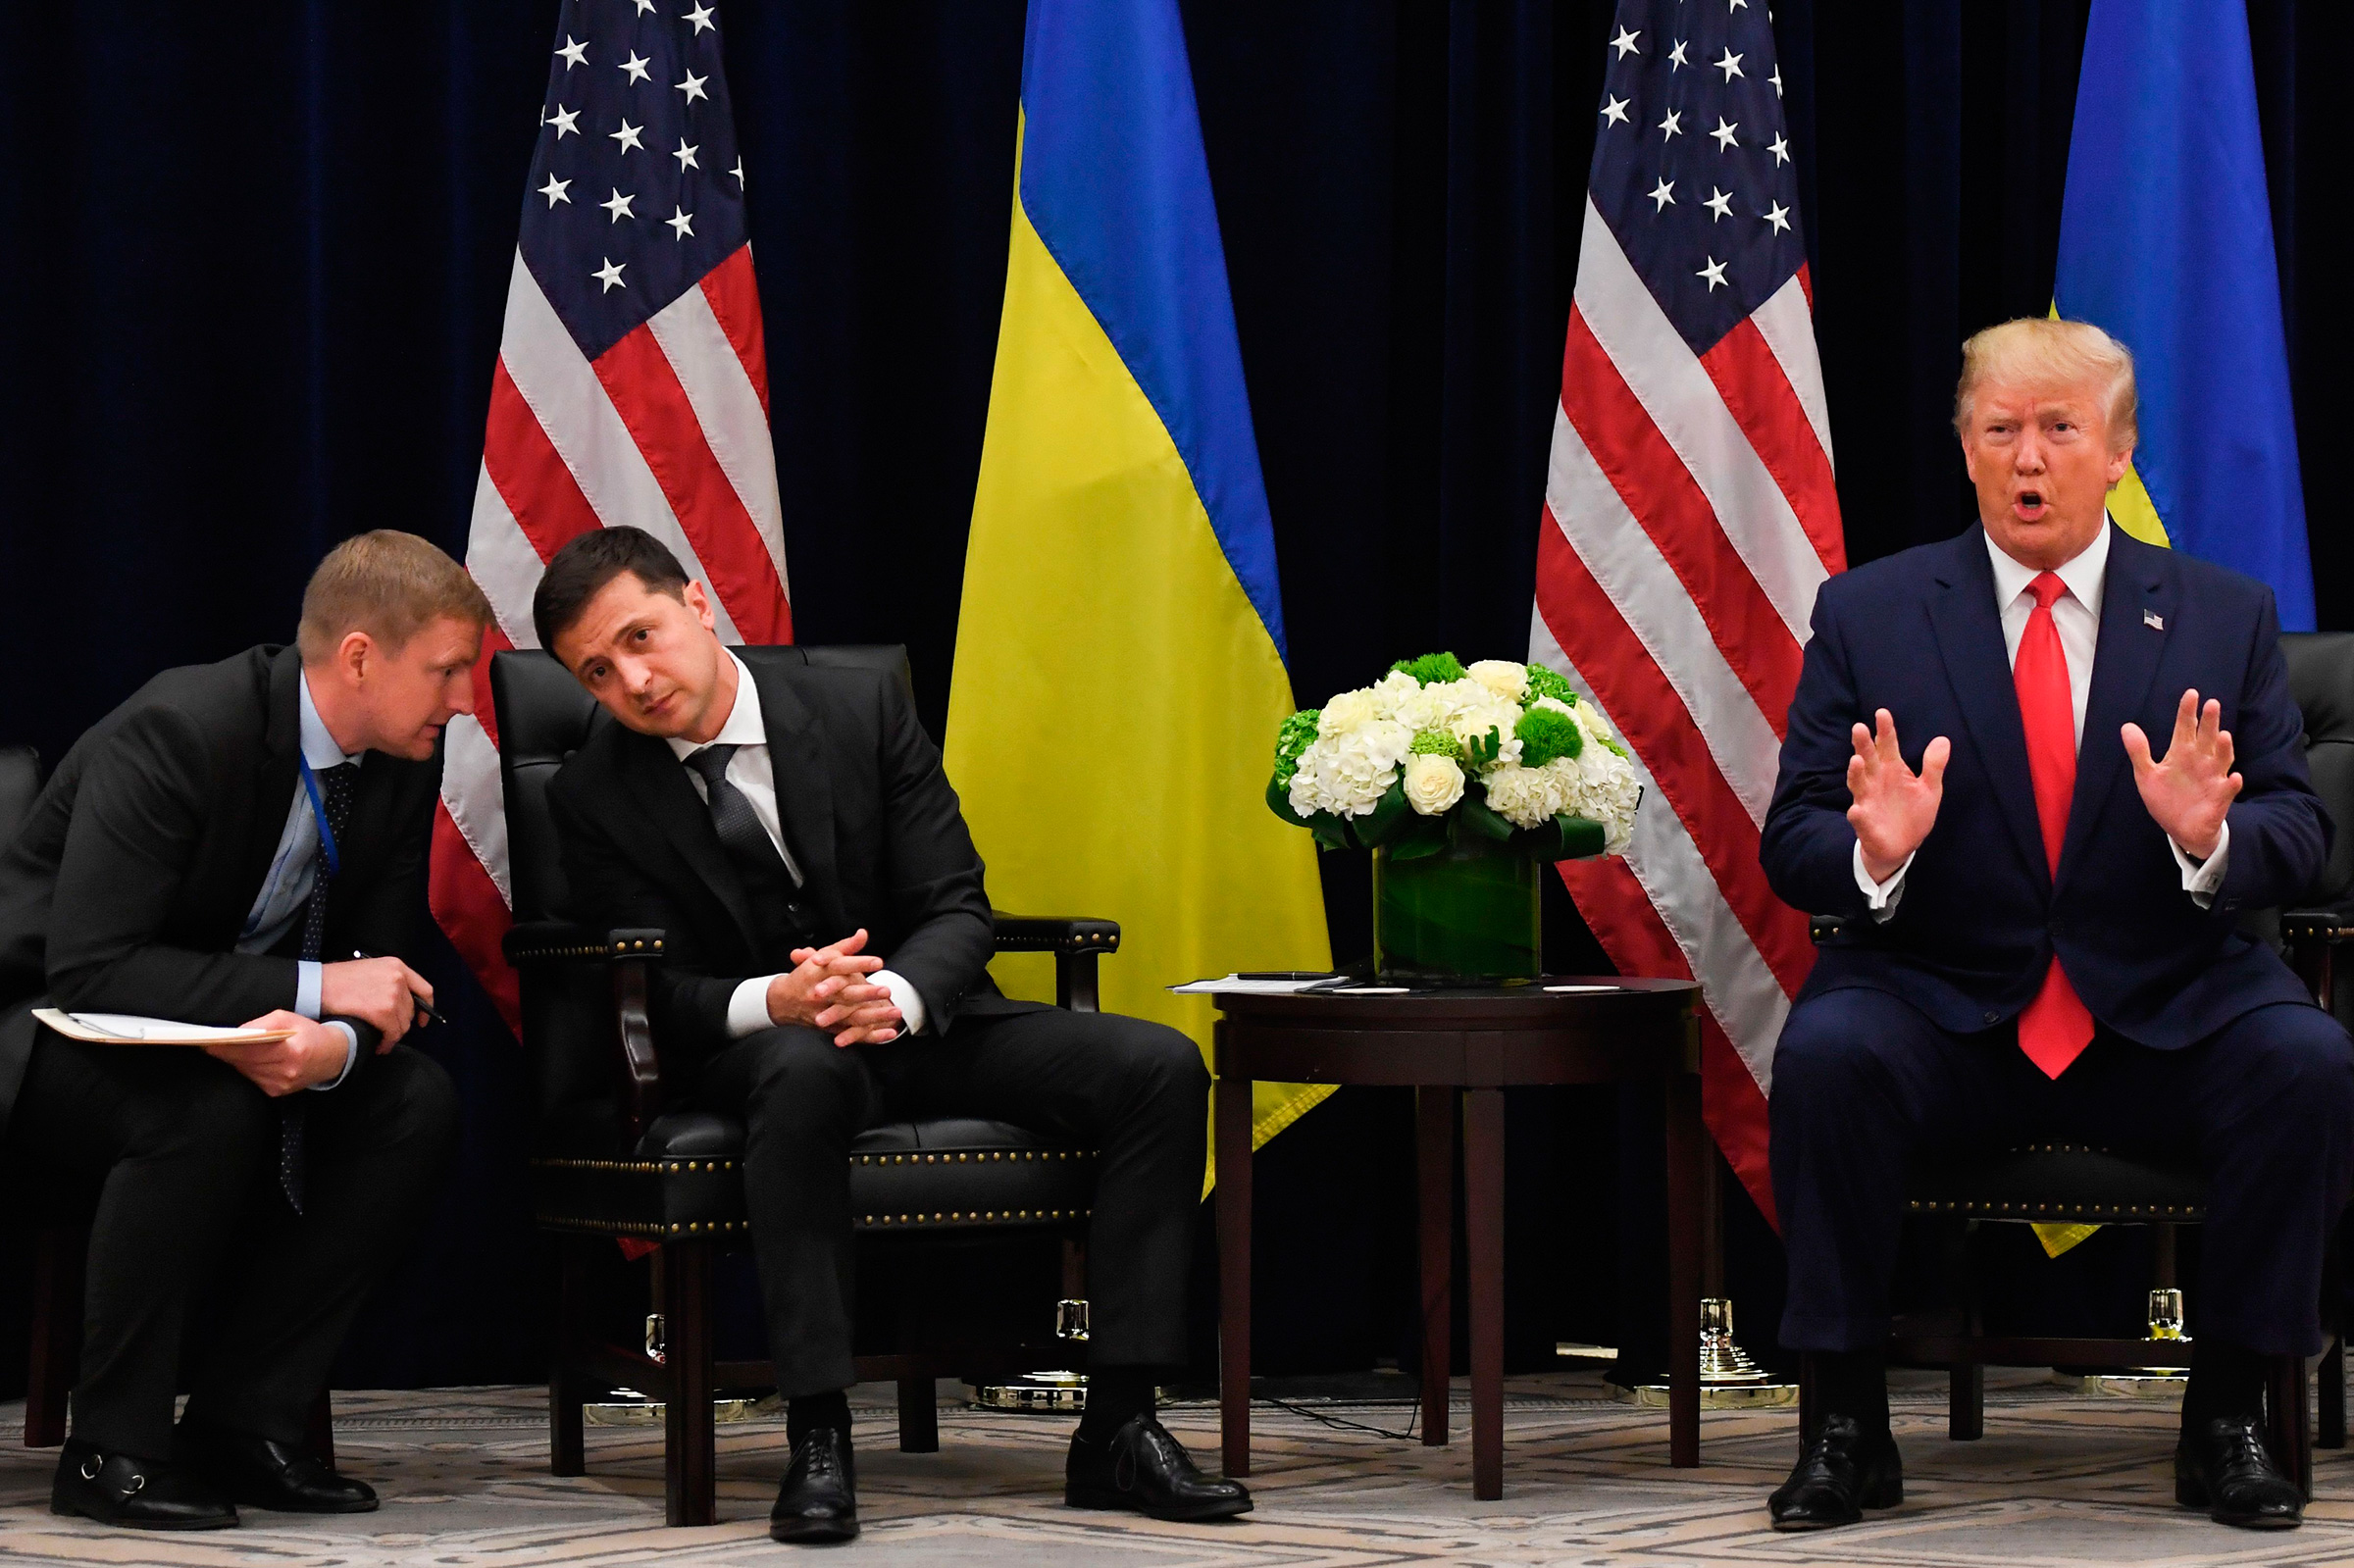 Zelensky and Trump at the U.N. General Assembly on Sept. 25